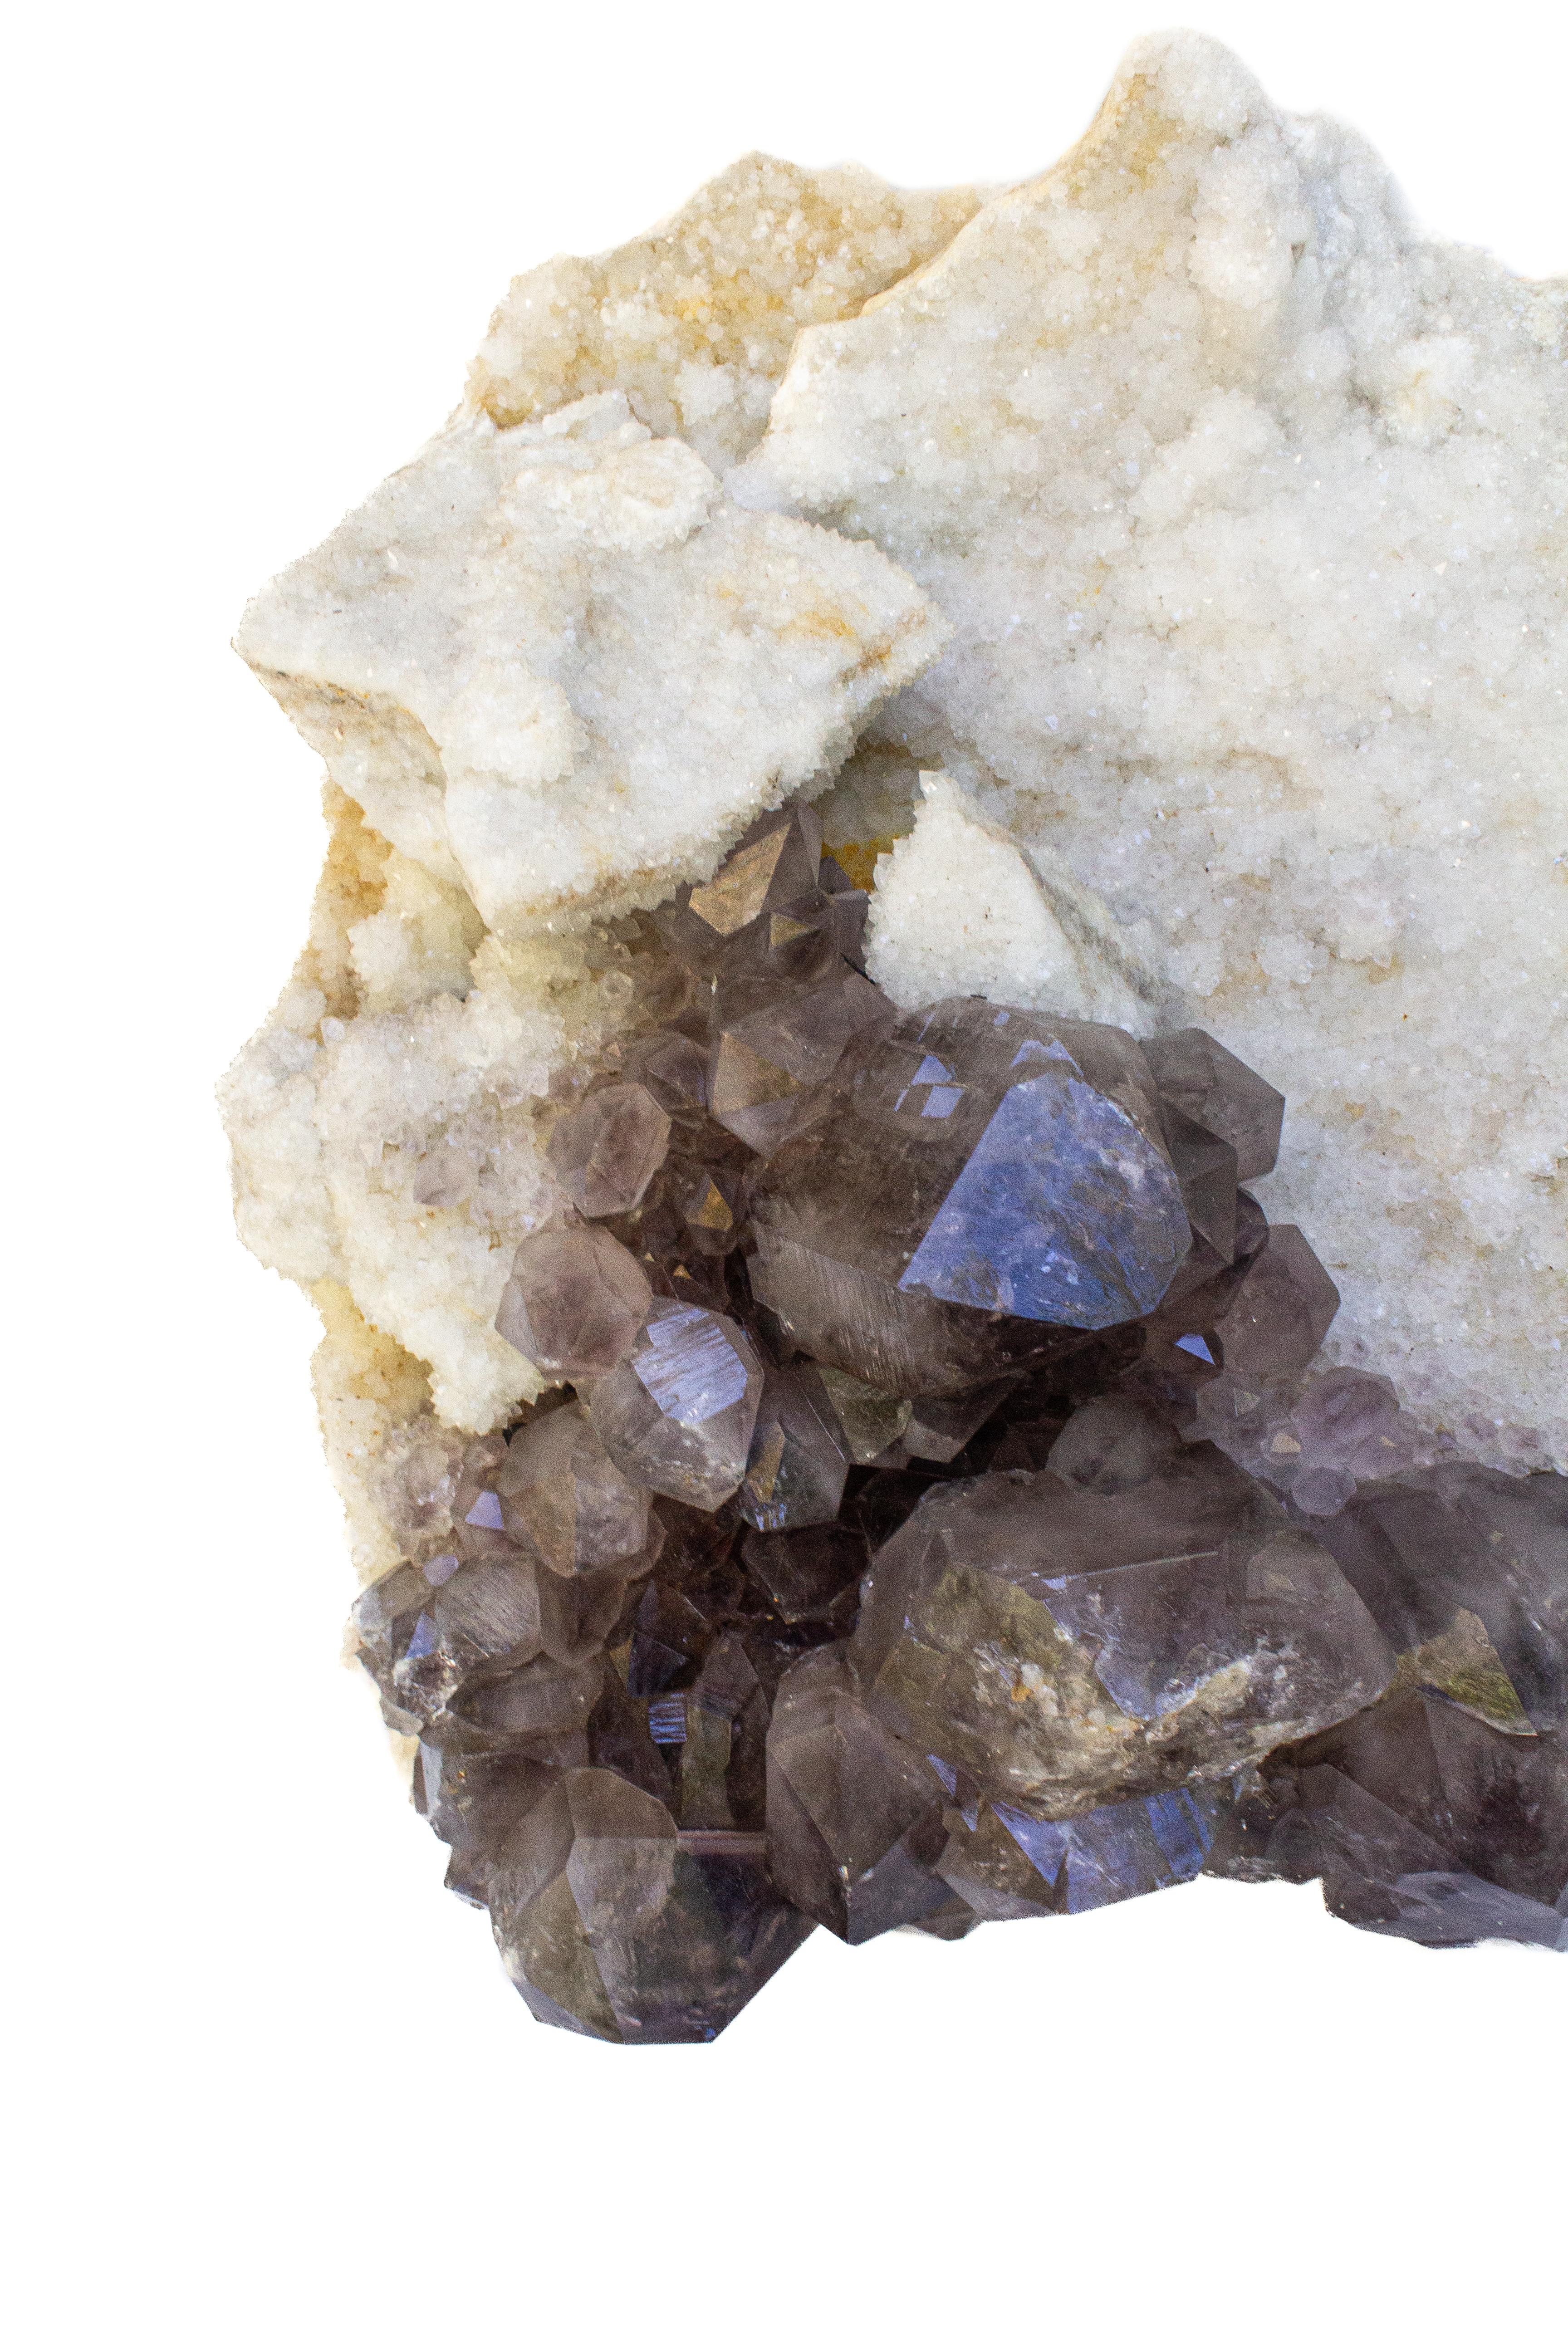 Organic Modern Large Milky Quartz Crystal Cluster with Amethyst Crystals For Sale